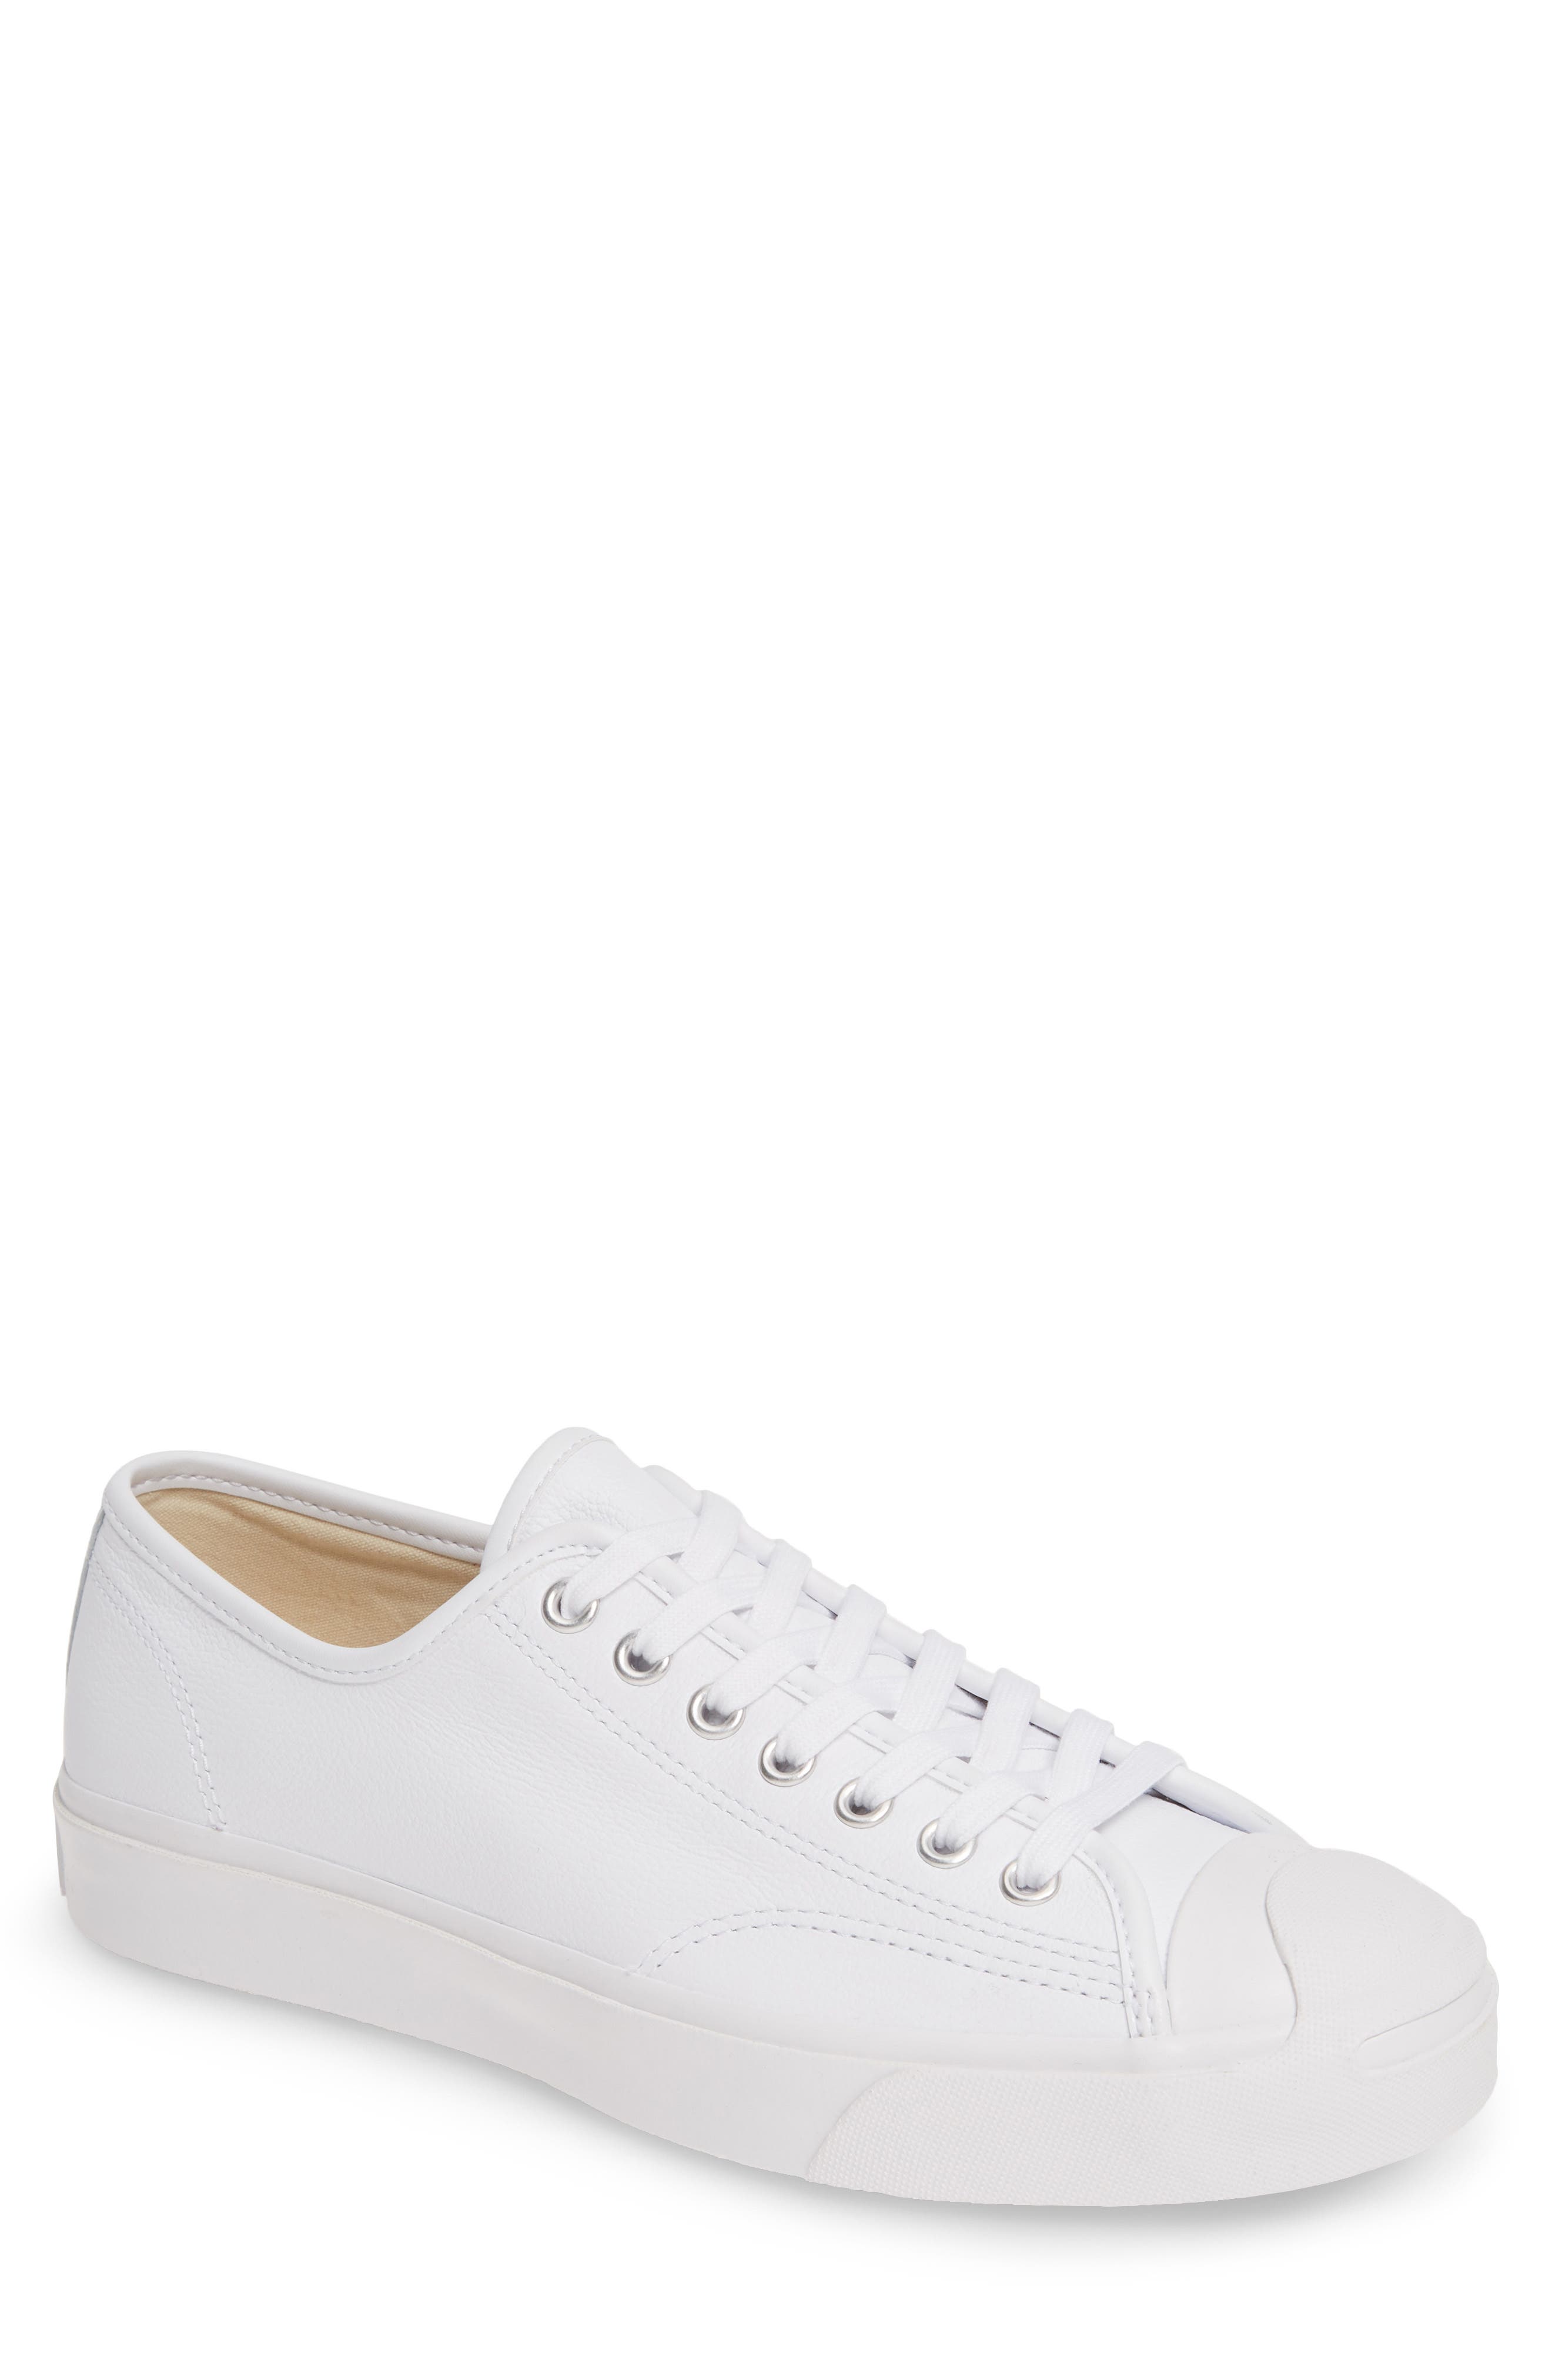 converse white shoes for men